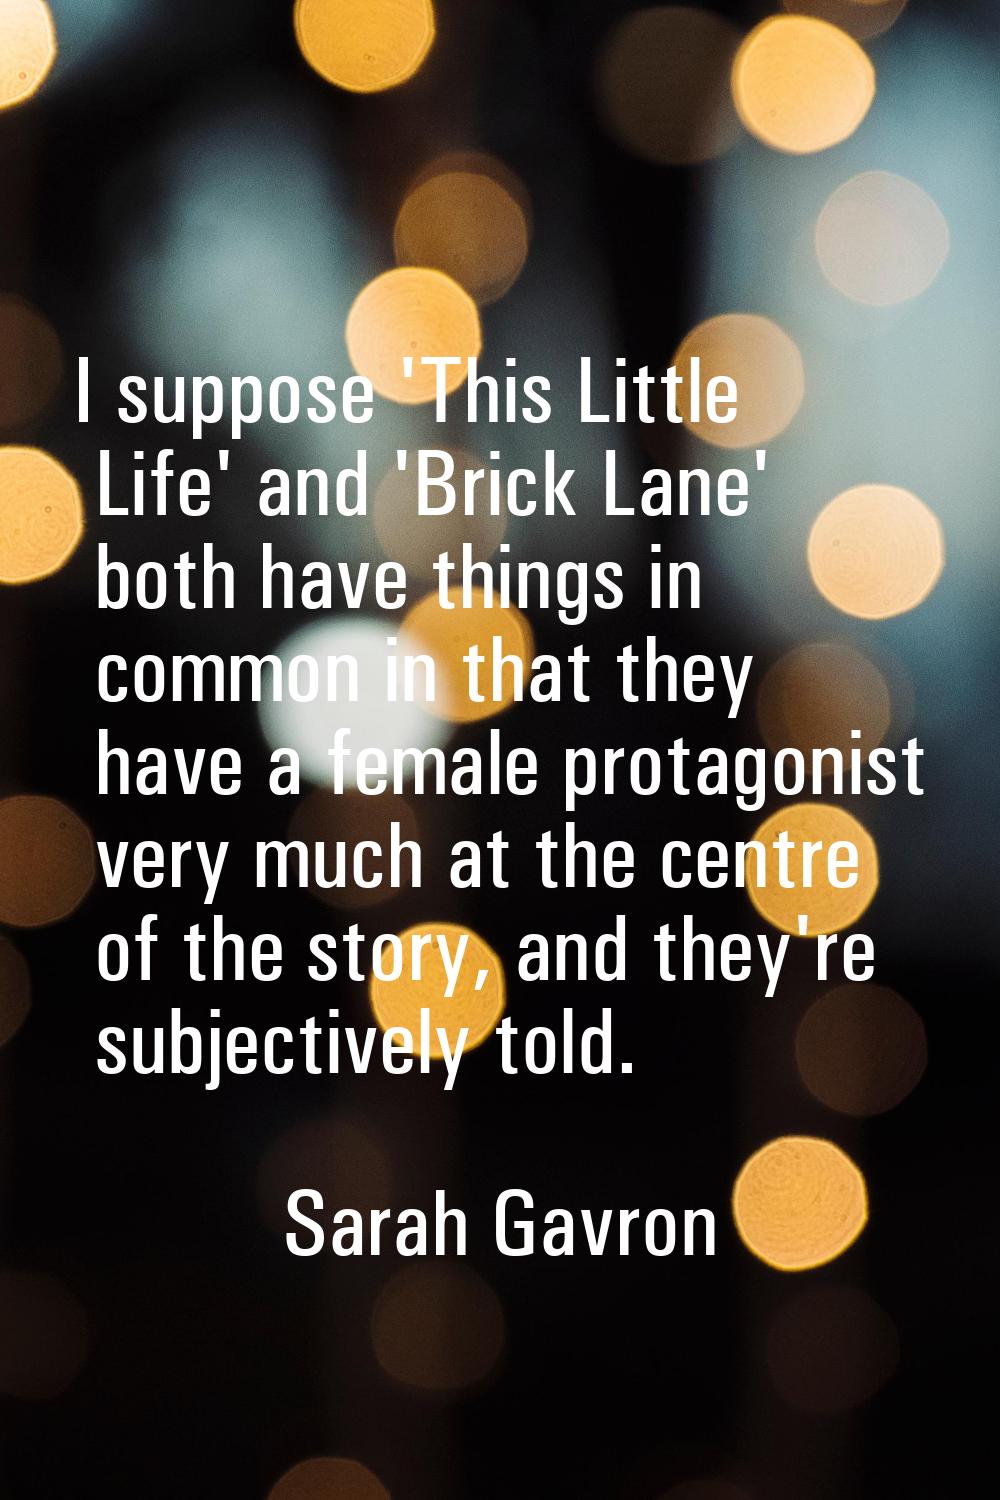 I suppose 'This Little Life' and 'Brick Lane' both have things in common in that they have a female